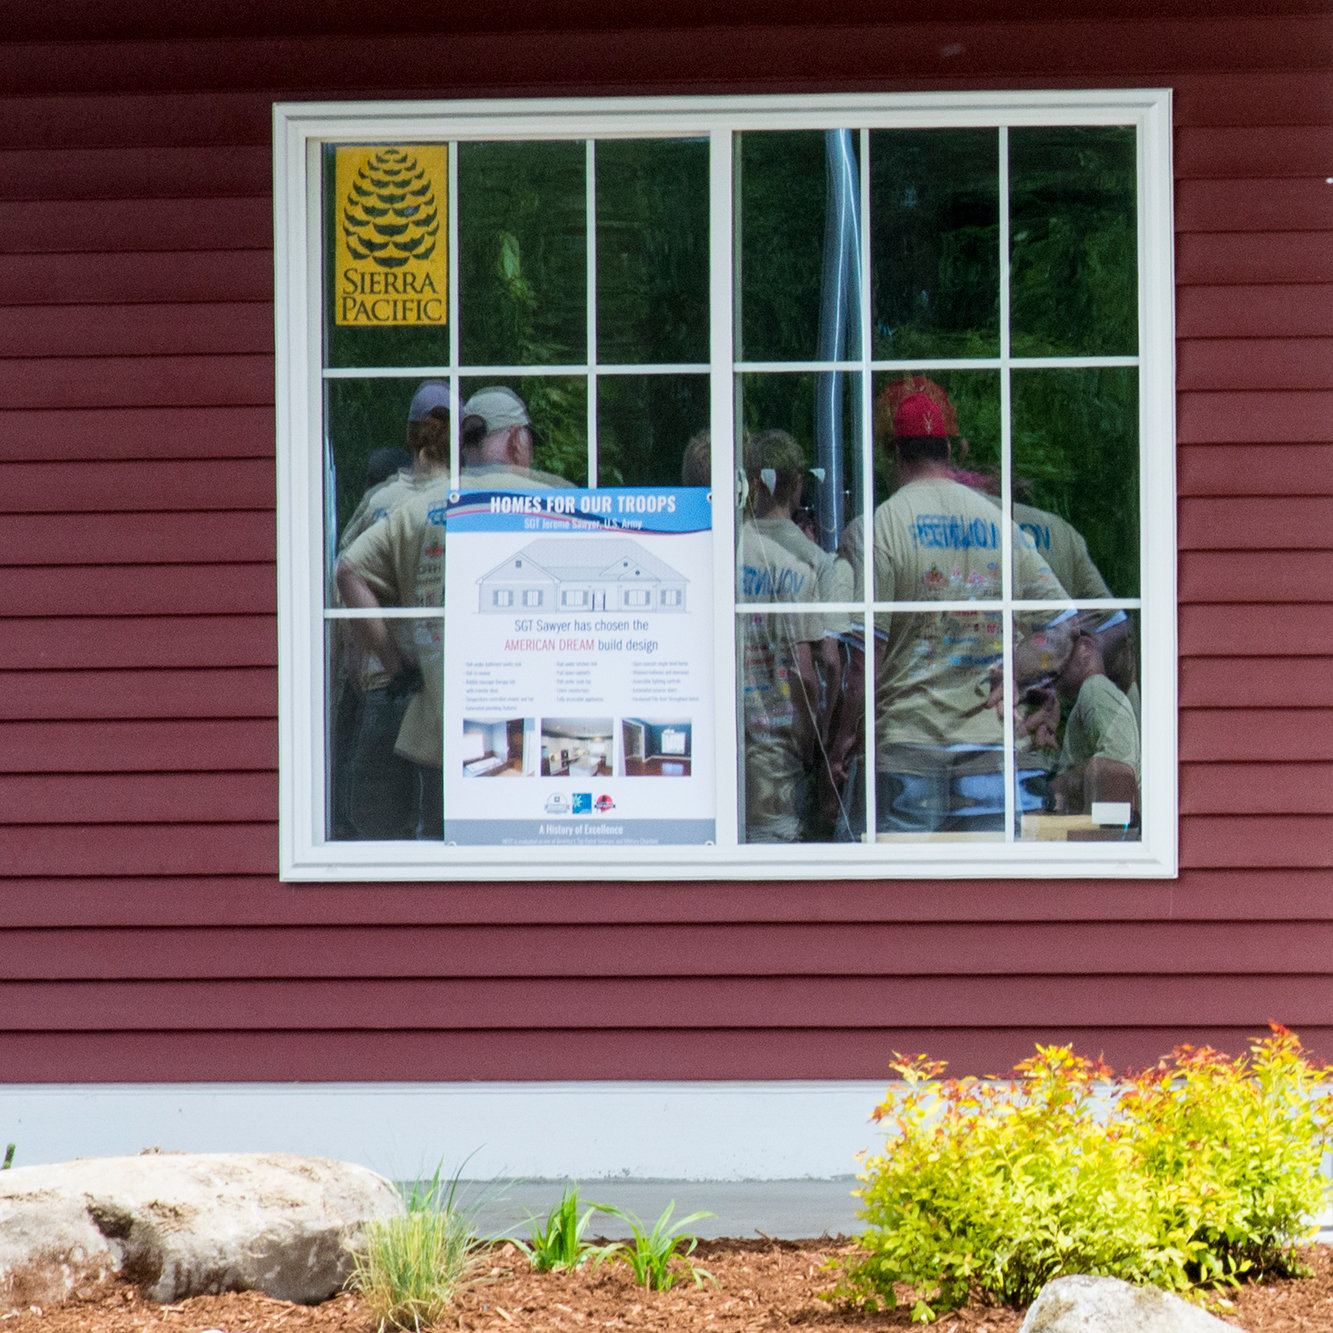 Volunteers are shown in the reflection of a window Saturday morning during an event at the soon-to-be home of wounded veteran Jereme Sawyer.